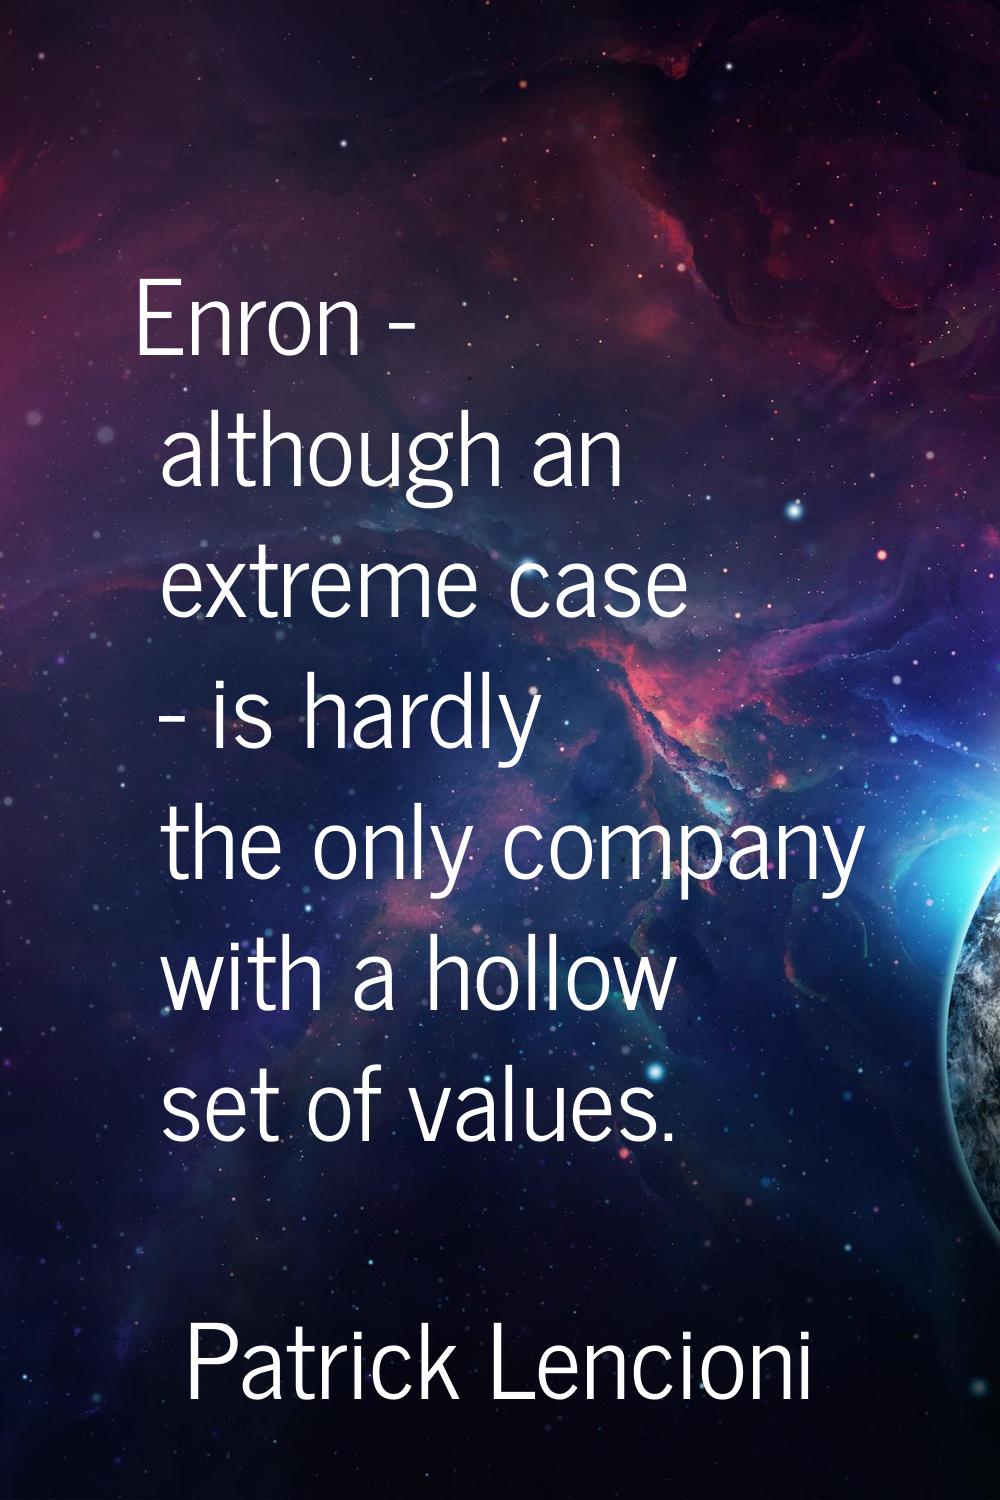 Enron - although an extreme case - is hardly the only company with a hollow set of values.